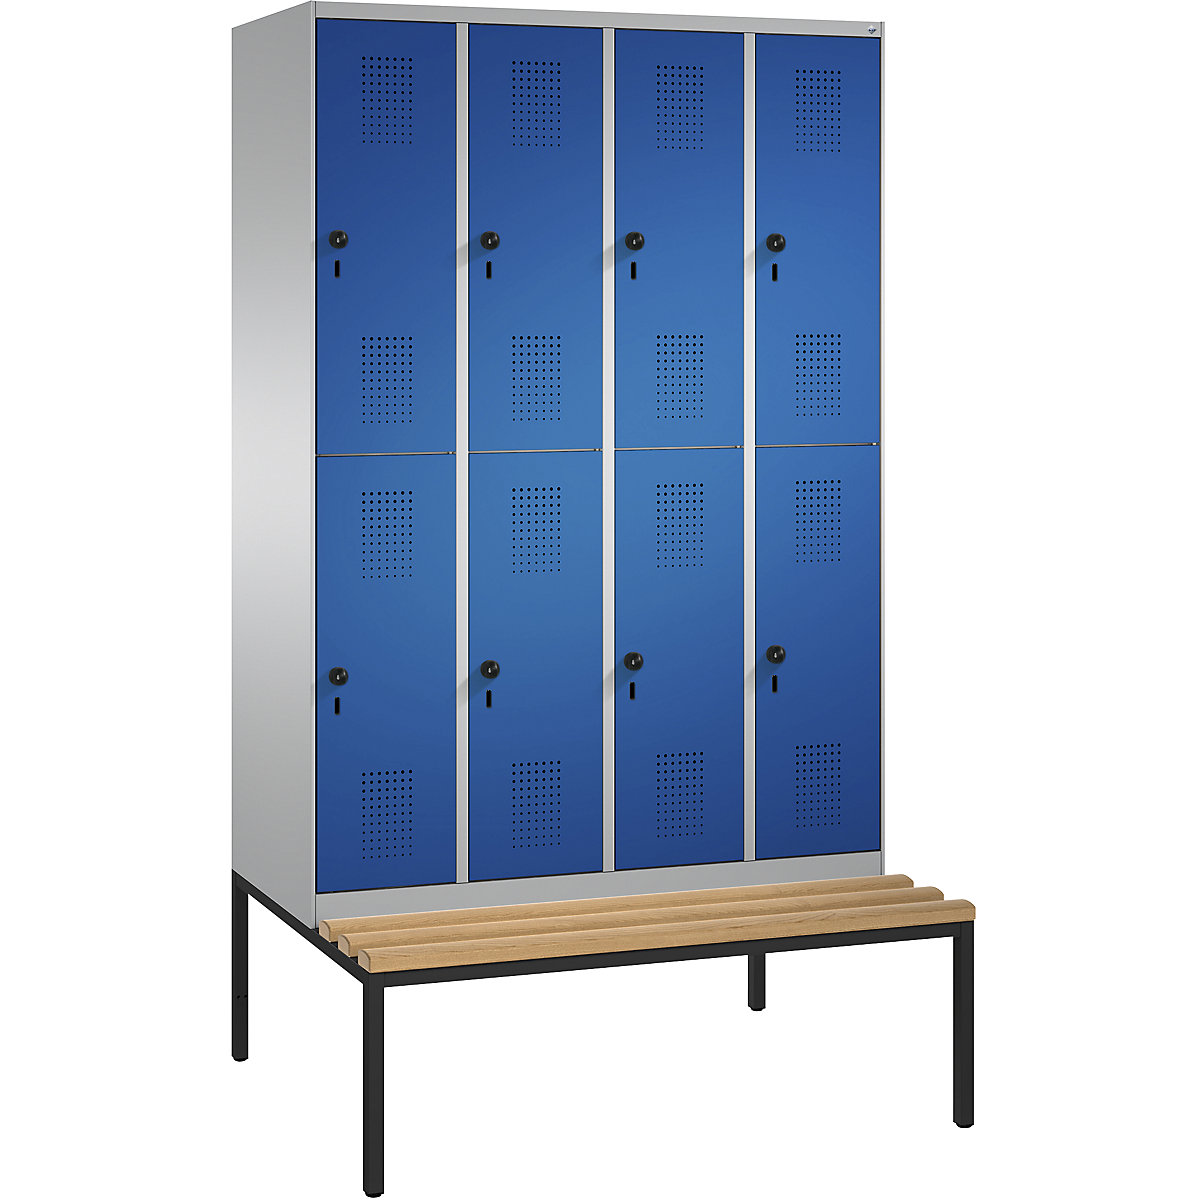 EVOLO cloakroom locker, double tier, with bench – C+P, 4 compartments, 2 shelf compartments each, compartment width 300 mm, white aluminium / gentian blue-5